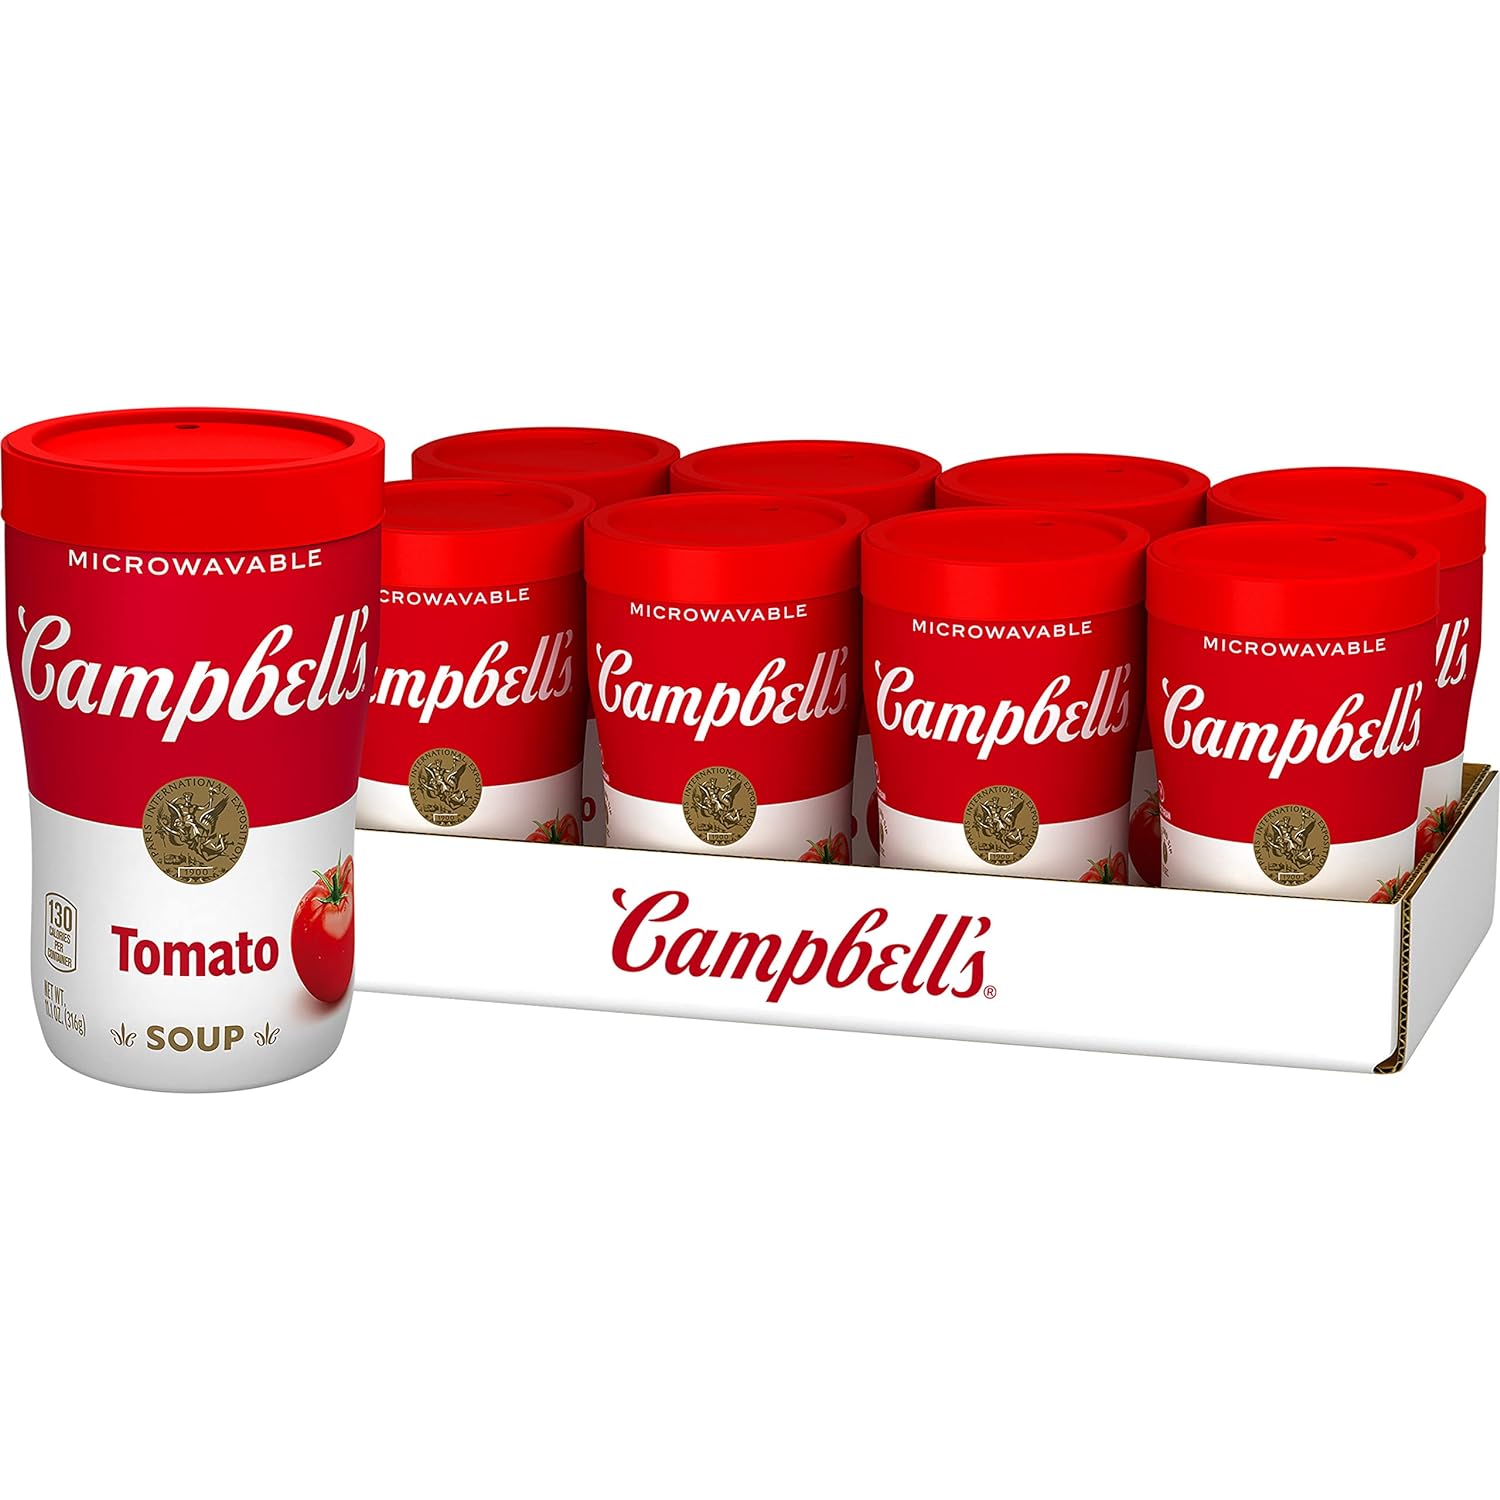 Campbell's Tomato Soup at Hand Classic 11.1 Oz Cup